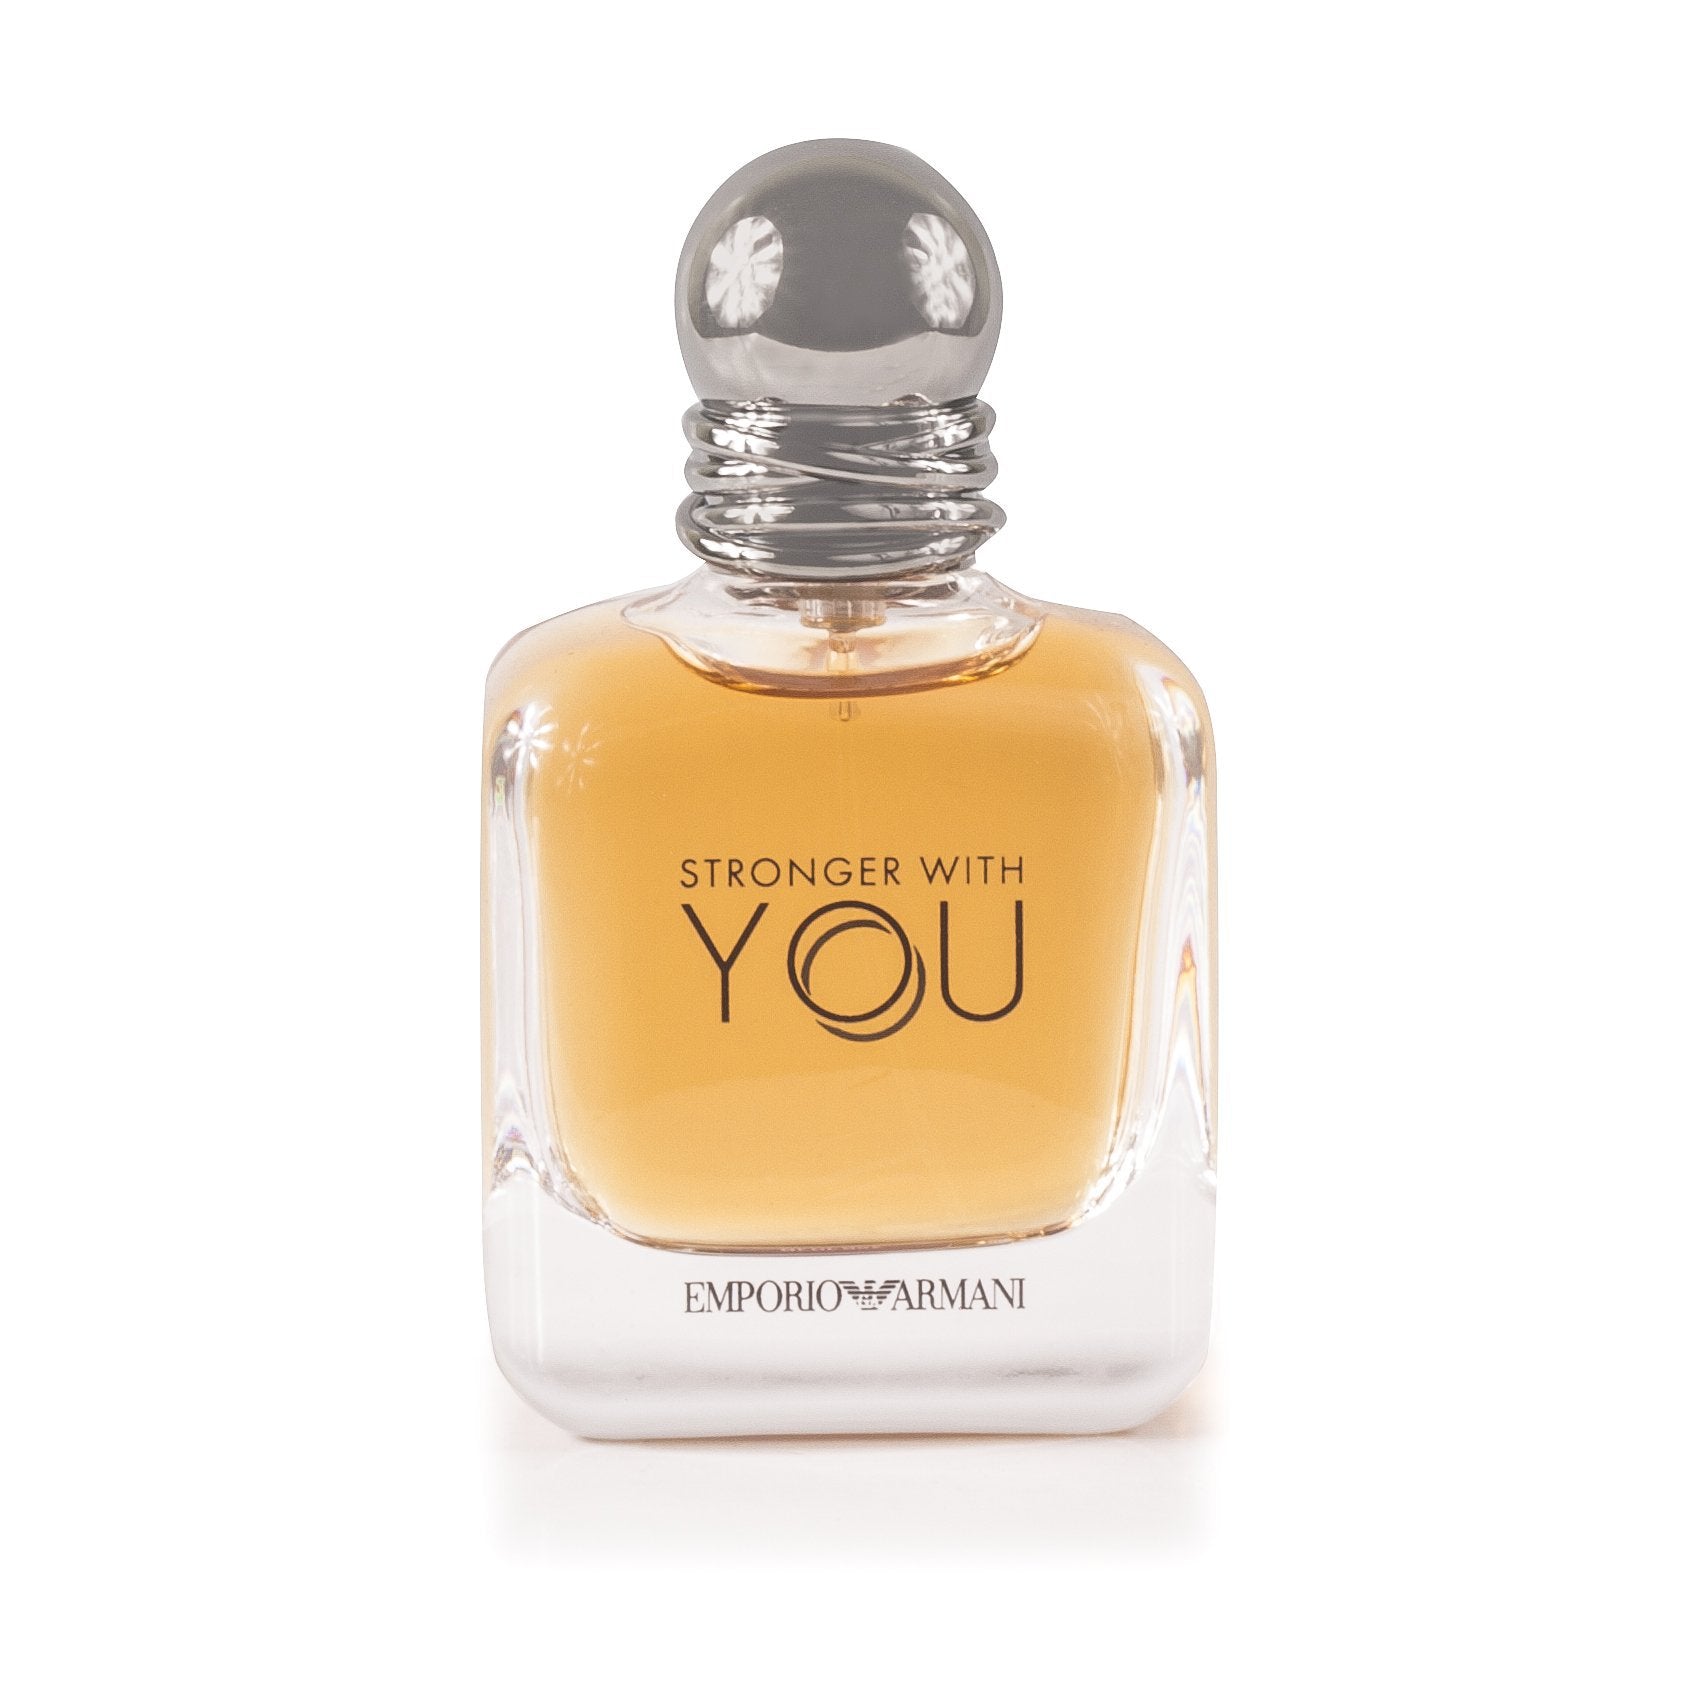 Stronger With You Eau de Toilette Spray for Men by Giorgio Armani, Product image 2